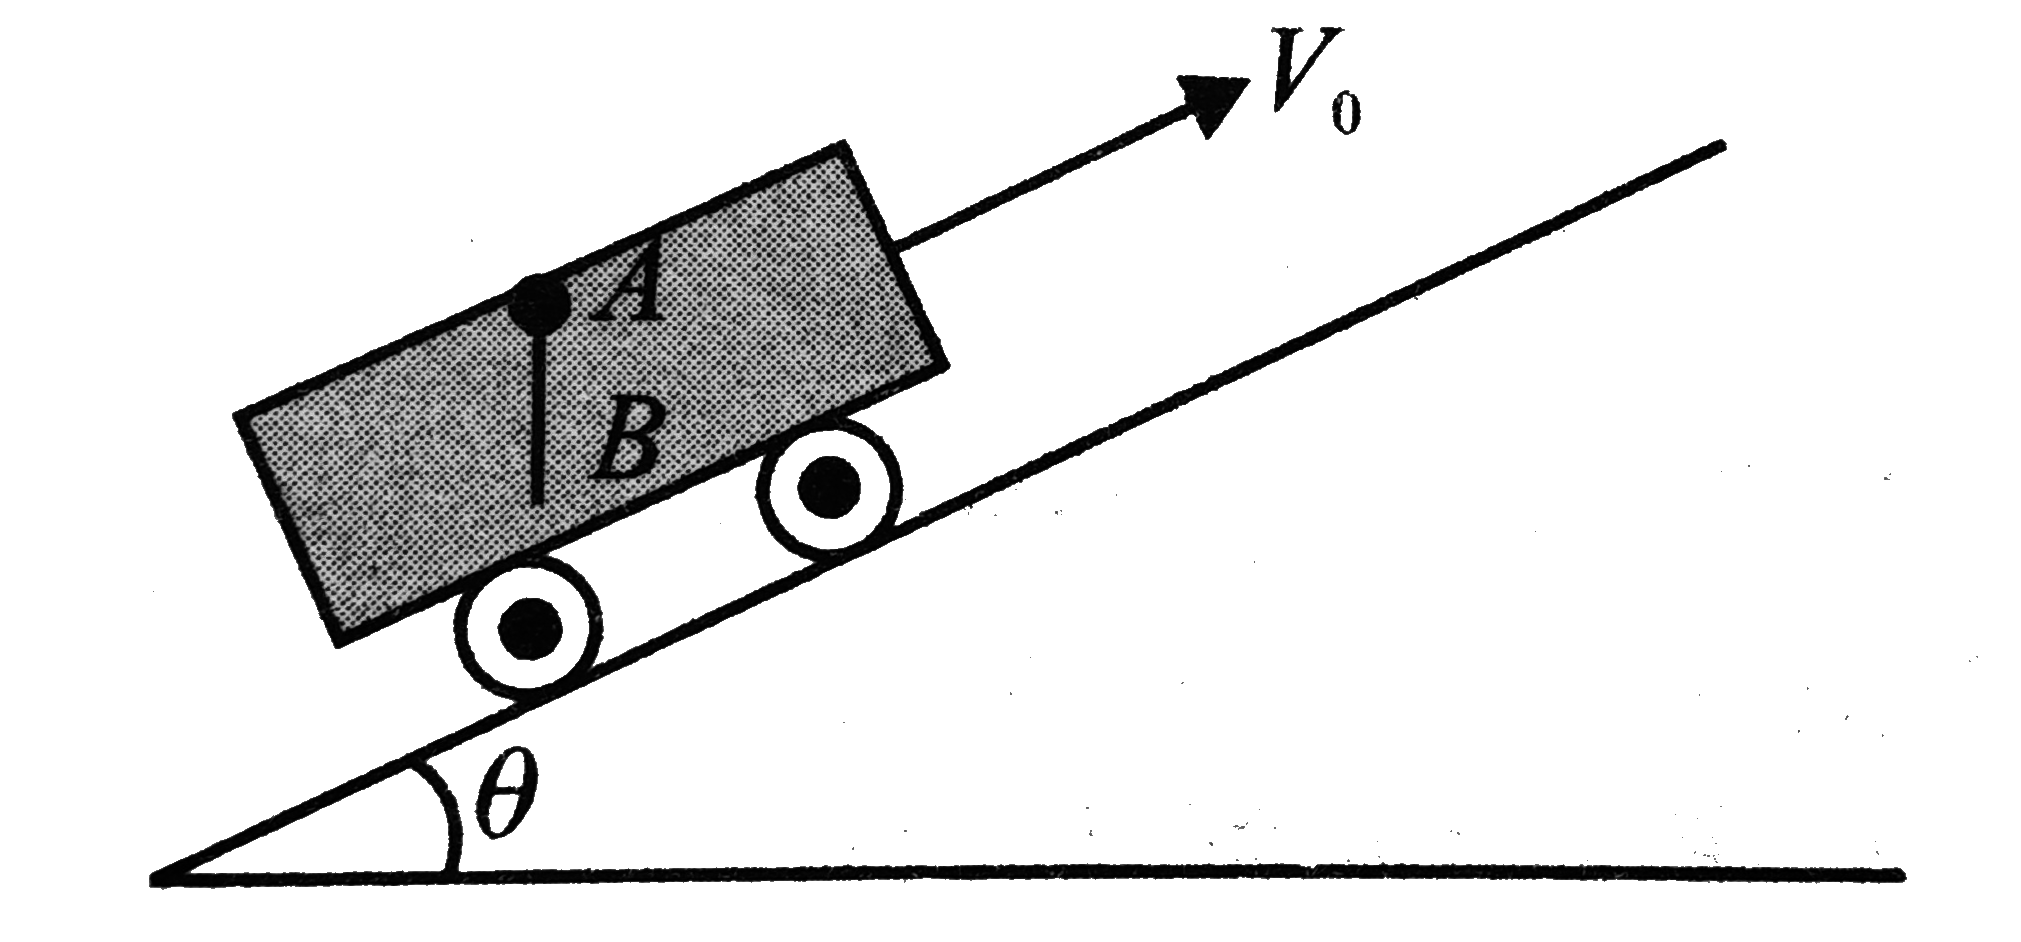 A uniform rod AB of length l and mass m hangs from point A in a car moving with velocity v(0) on an inclined plane as shown in Fig. The rod can rotate in vertical plane about the axis at point A. if the car suddenly stops, the angular speed with which the rod starts rotating is